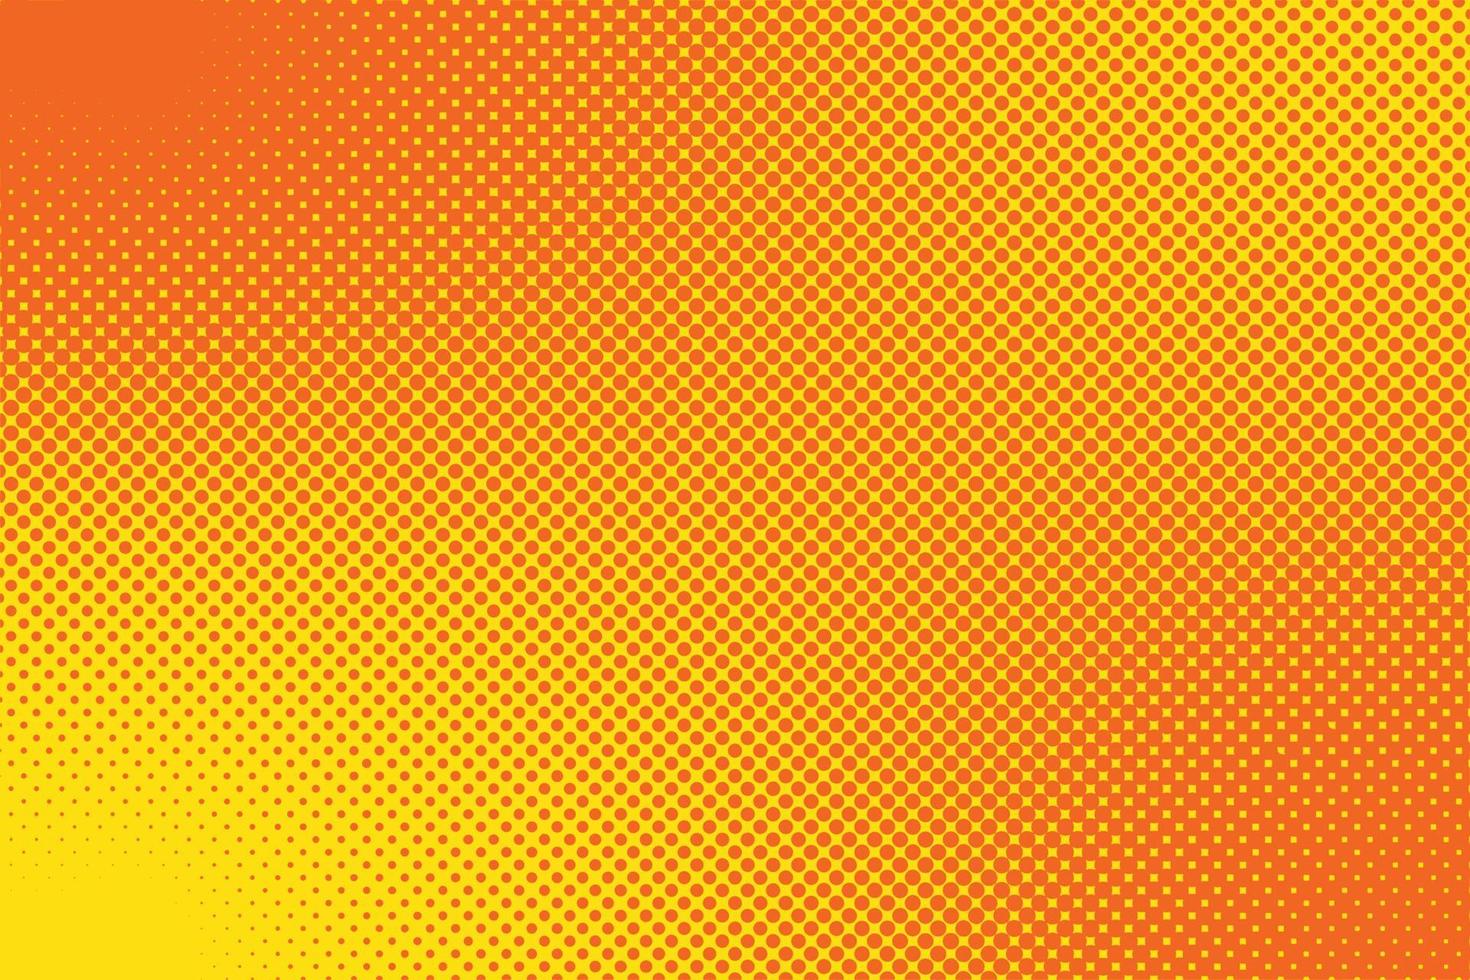 A yellow and orange background with a pattern of squares and dots. vector